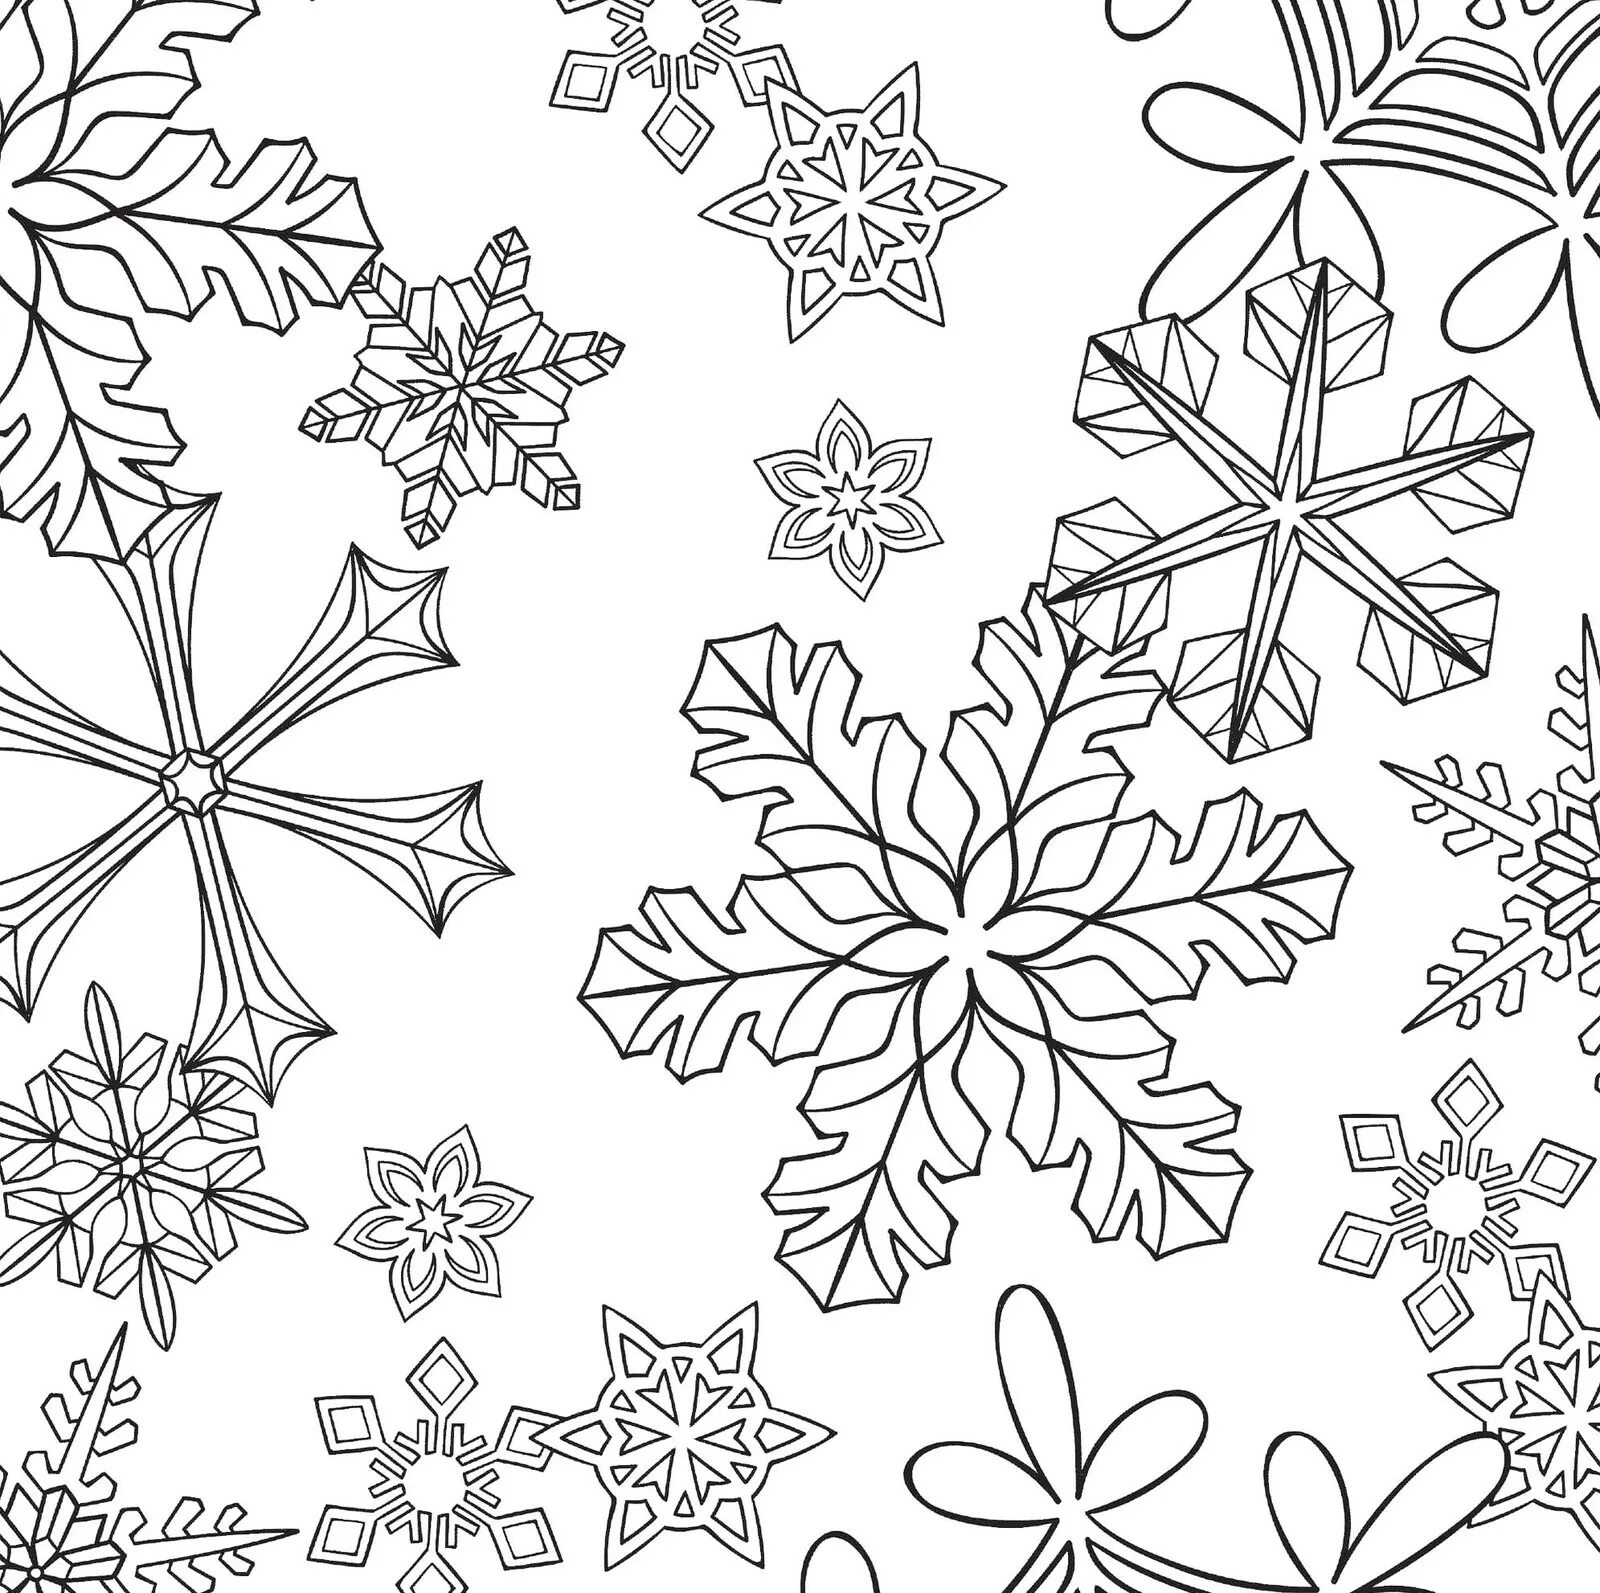 Winter patterns for kids #15